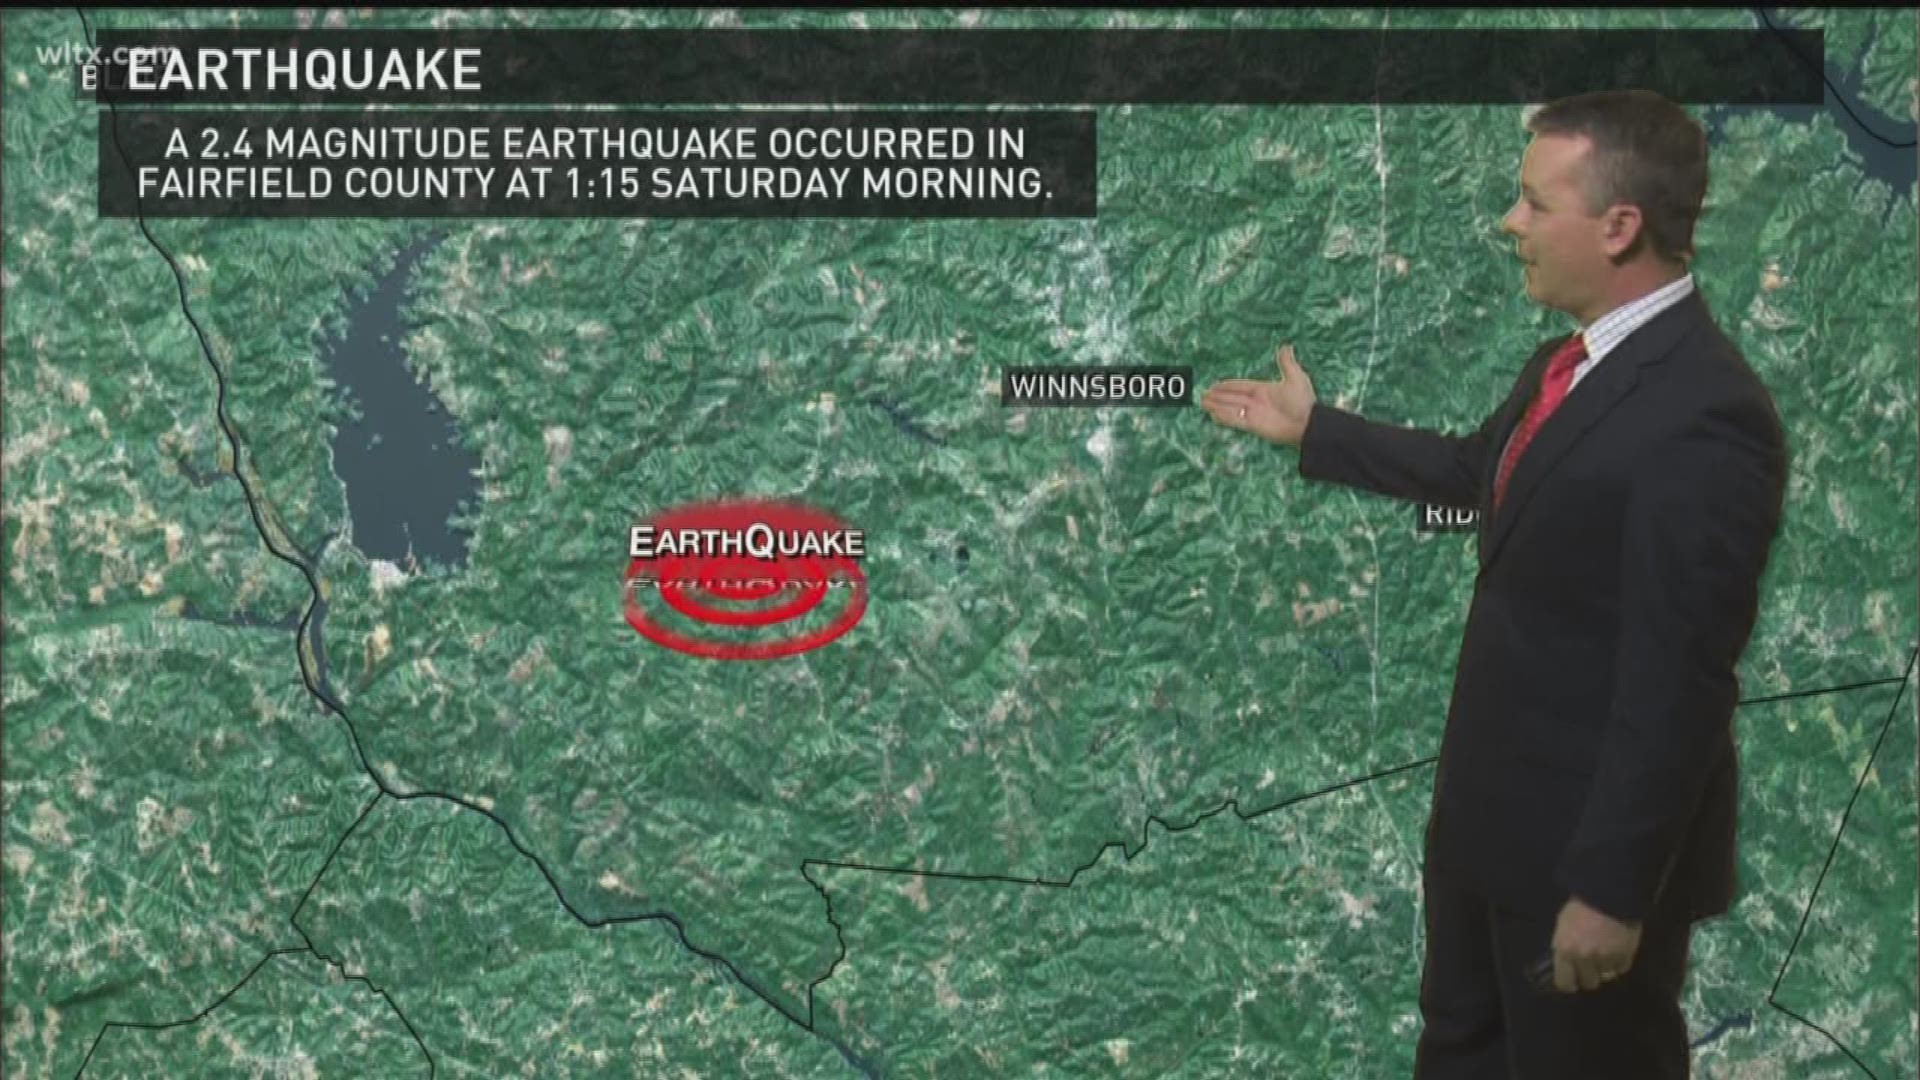 The U.S. Geological Survey says a 2.4 magnitude quake struck around 1:15 Saturday morning. It was centered about seven miles west-southwest of Winnsboro Mills.